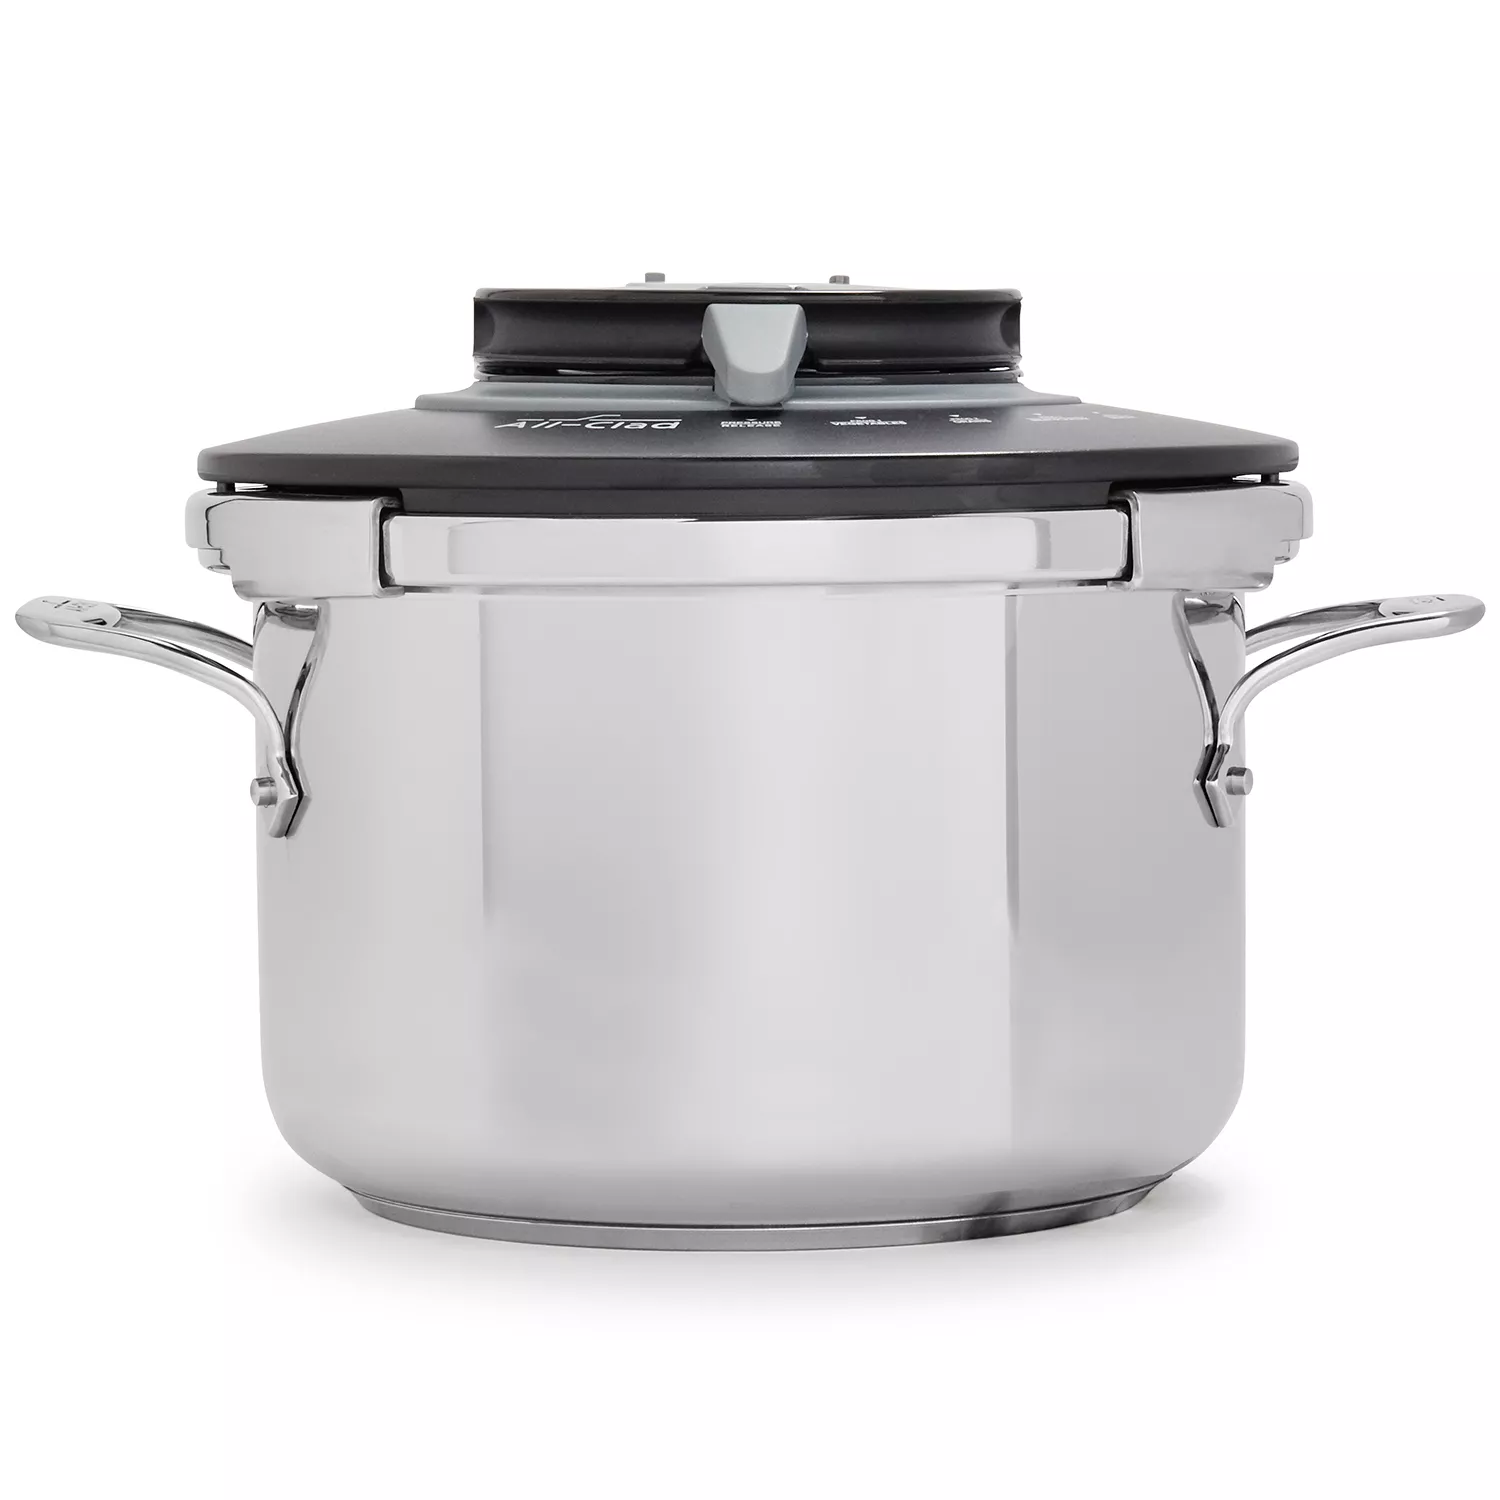 Gourmet Accessories, PC8-Precision Stainless Steel Stovetop Pressure Cooker  with Steaming Basket, 8.4 quart